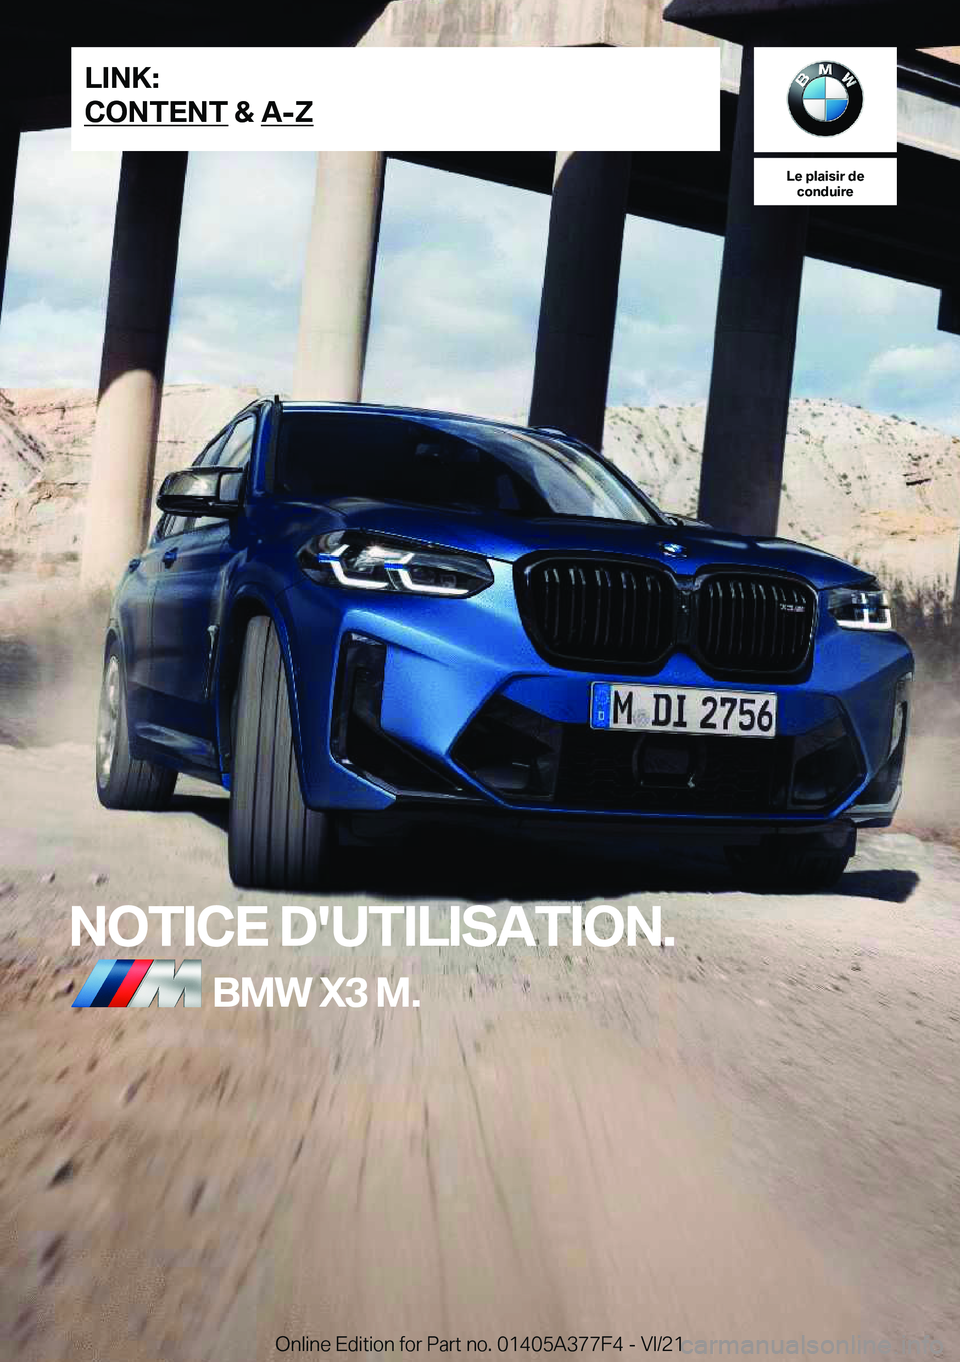 BMW X3 M 2022  Notices Demploi (in French) �L�e��p�l�a�i�s�i�r��d�e�c�o�n�d�u�i�r�e
�N�O�T�I�C�E��D�'�U�T�I�L�I�S�A�T�I�O�N�.�B�M�W��X�3��M�.�L�I�N�K�:
�C�O�N�T�E�N�T��&��A�-�Z�O�n�l�i�n�e��E�d�i�t�i�o�n��f�o�r��P�a�r�t��n�o�.�